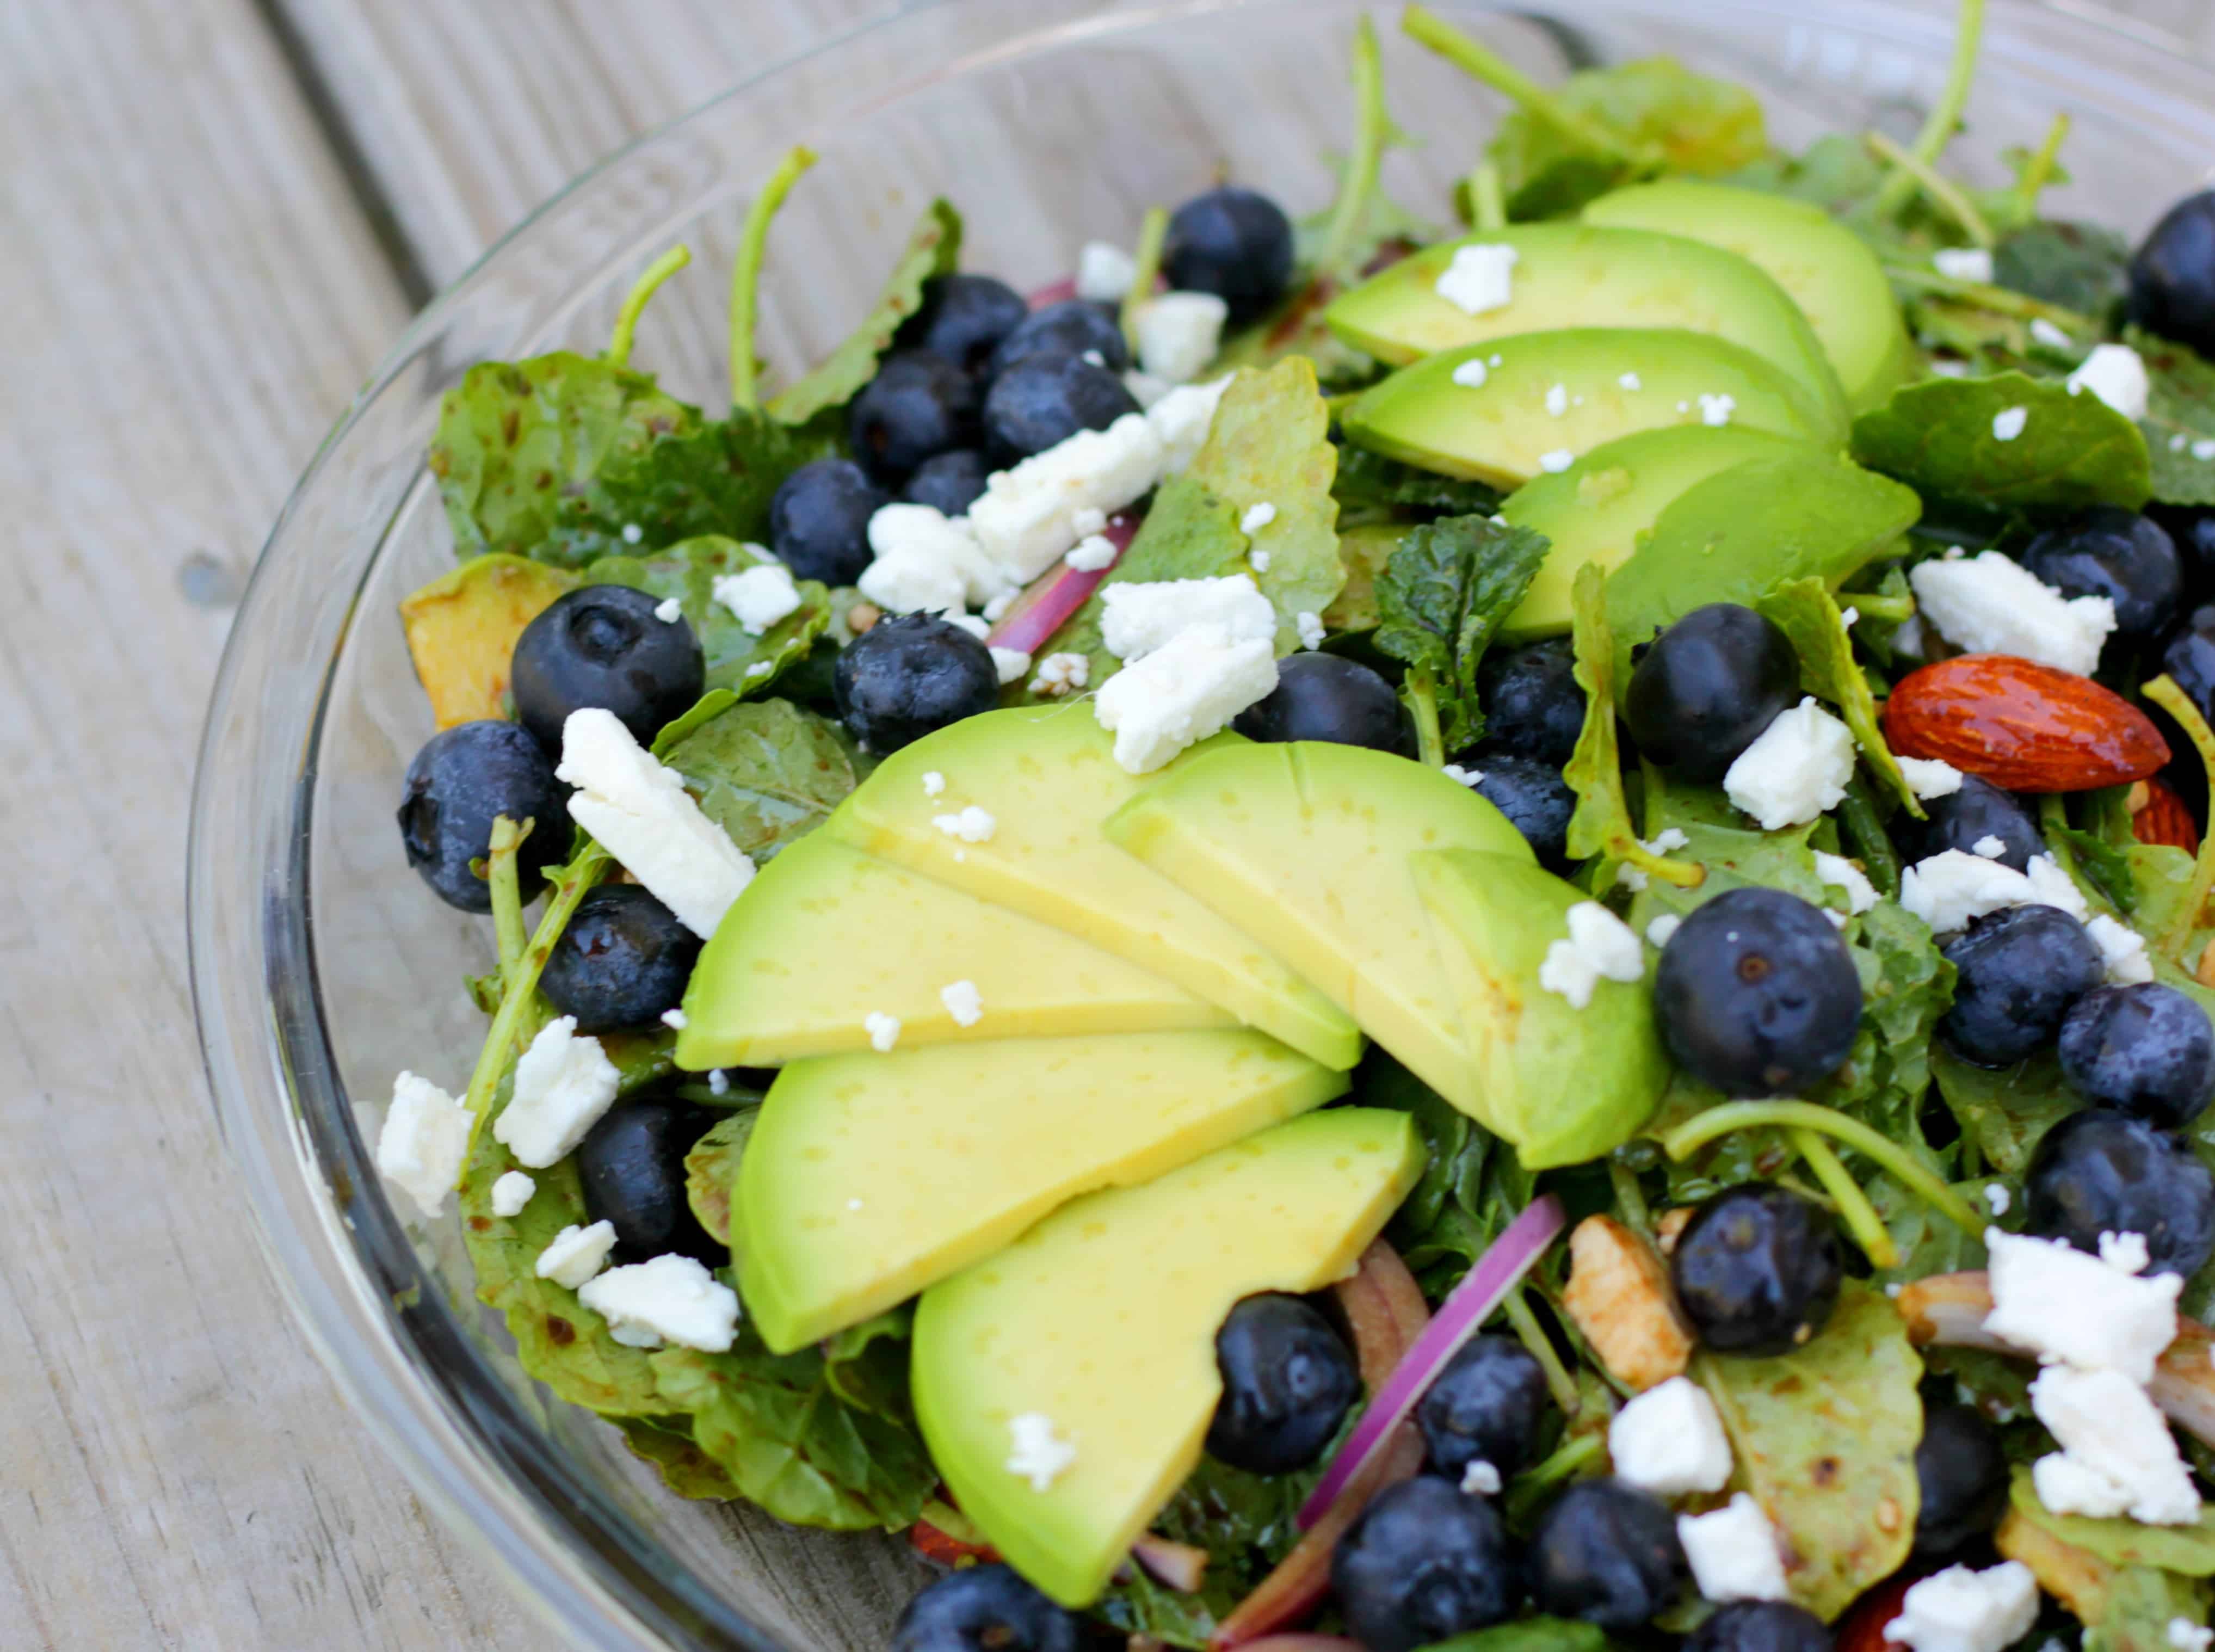 A blueberry salad with avocado and feta cheese